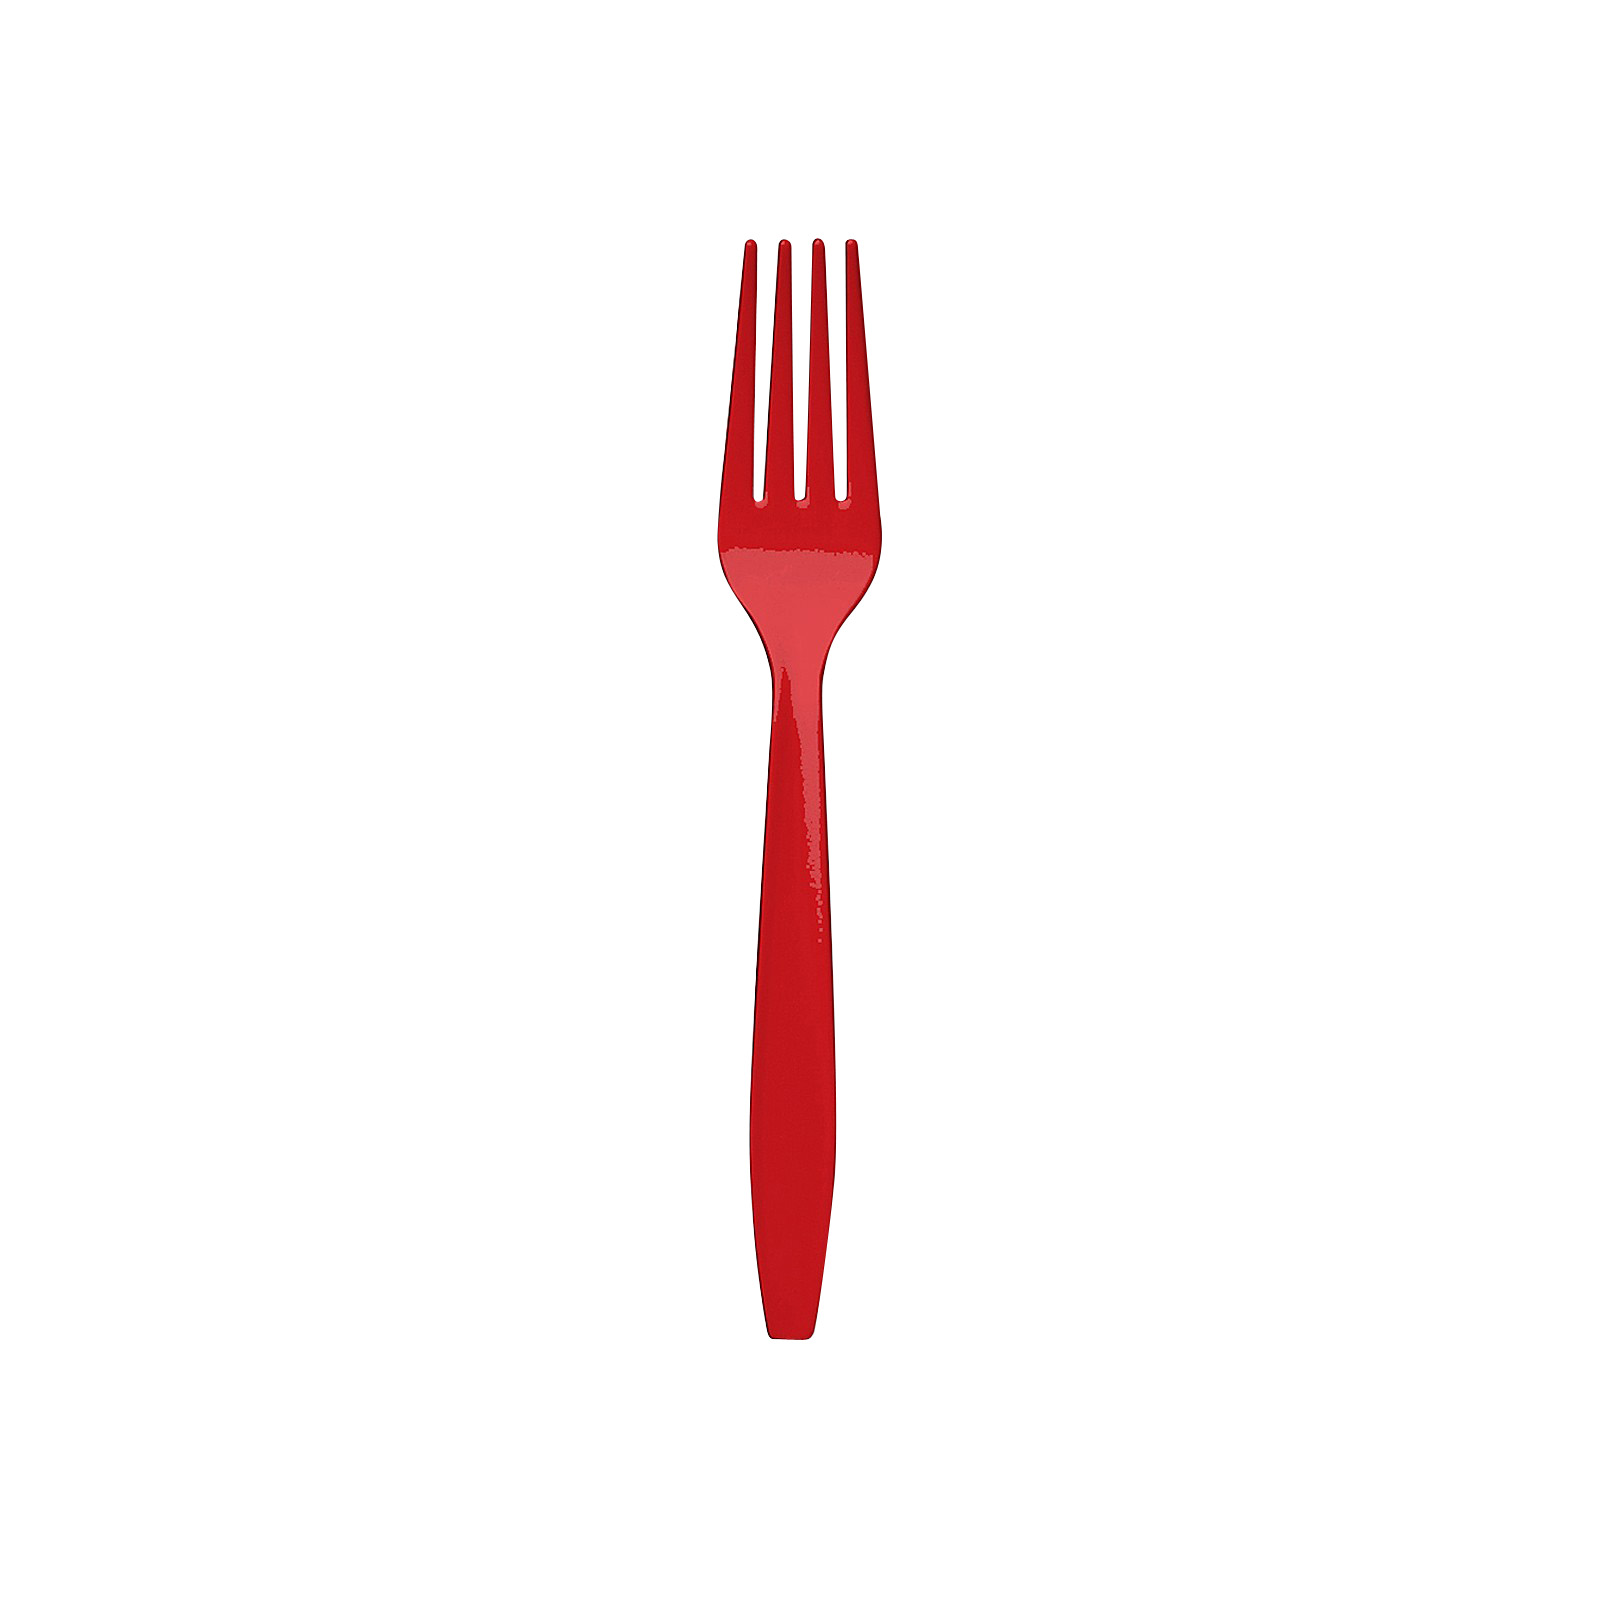 The Official PBS KIDS Shop | Classic Red Plastic Forks - 24 Count